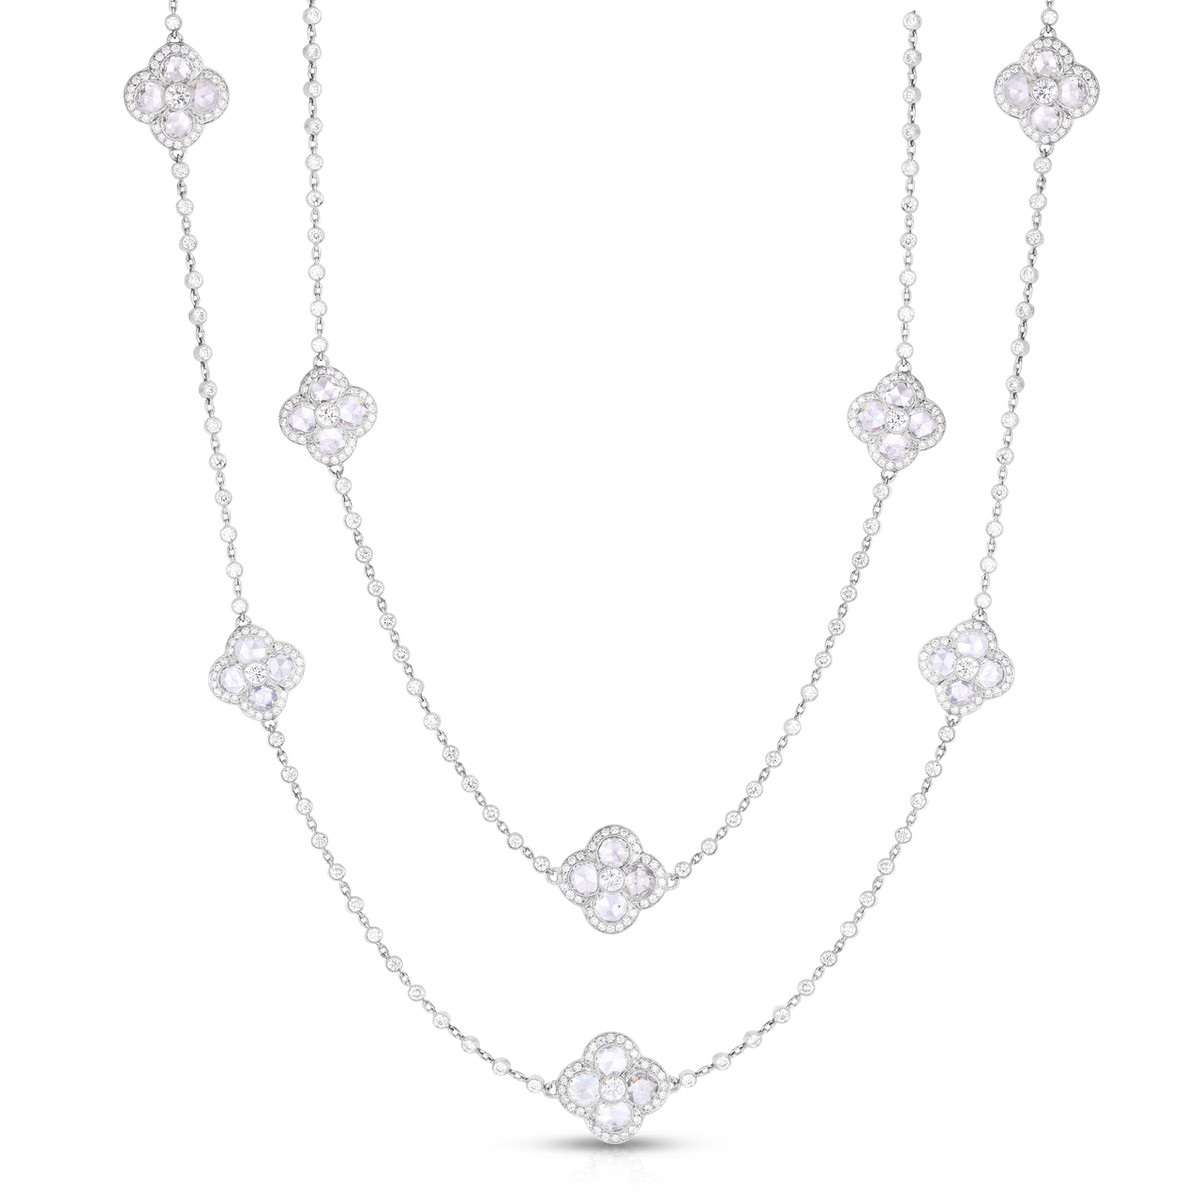 Hyde Park Collection Platinum Diamond Station Chain Necklace-54455 Product Image